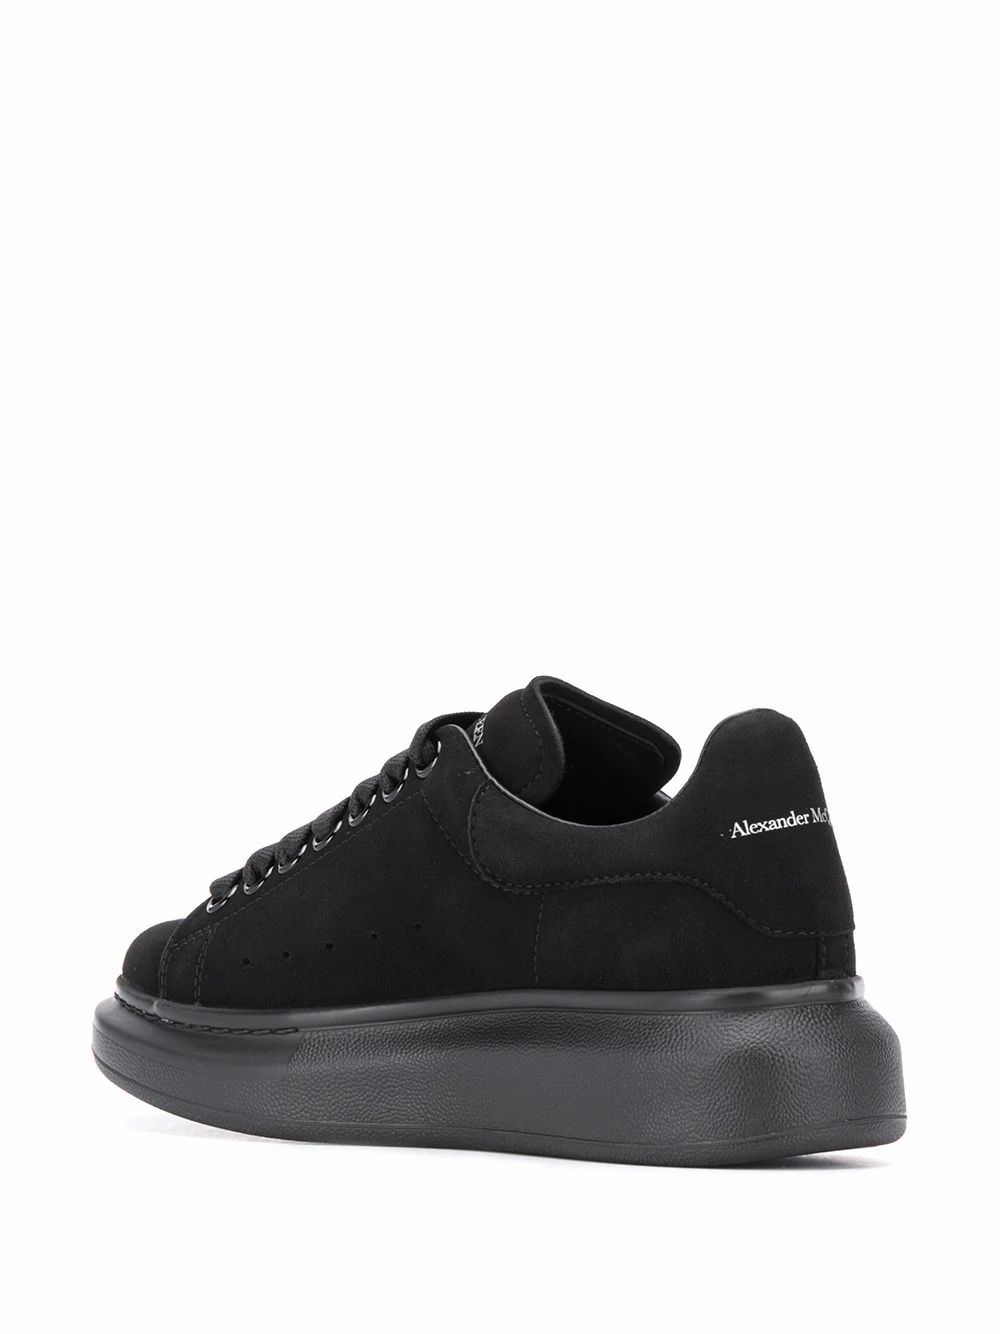 SNEAKERS ALEXANDER MCQUEEN, SUEDE 100%, color BLACK, Rubber sole, SS21, product code 558943WHV671000